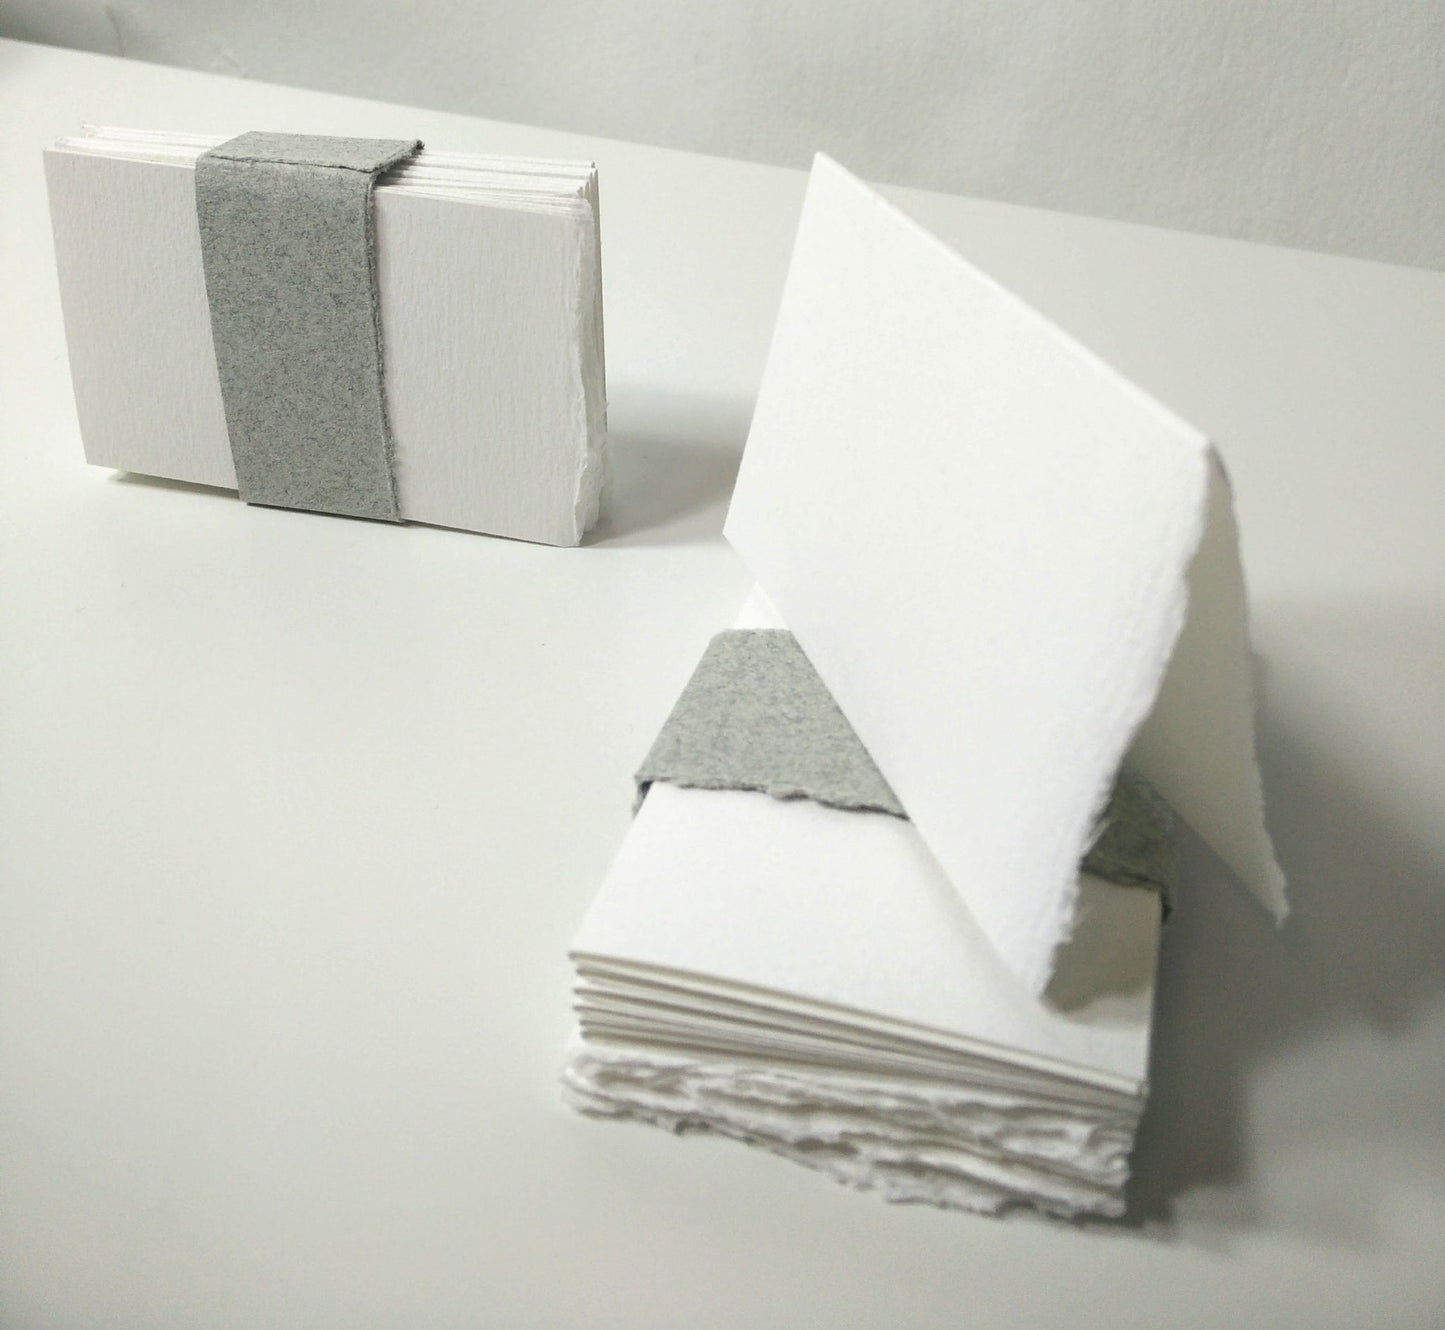 Deckled edged cotton rag place cards